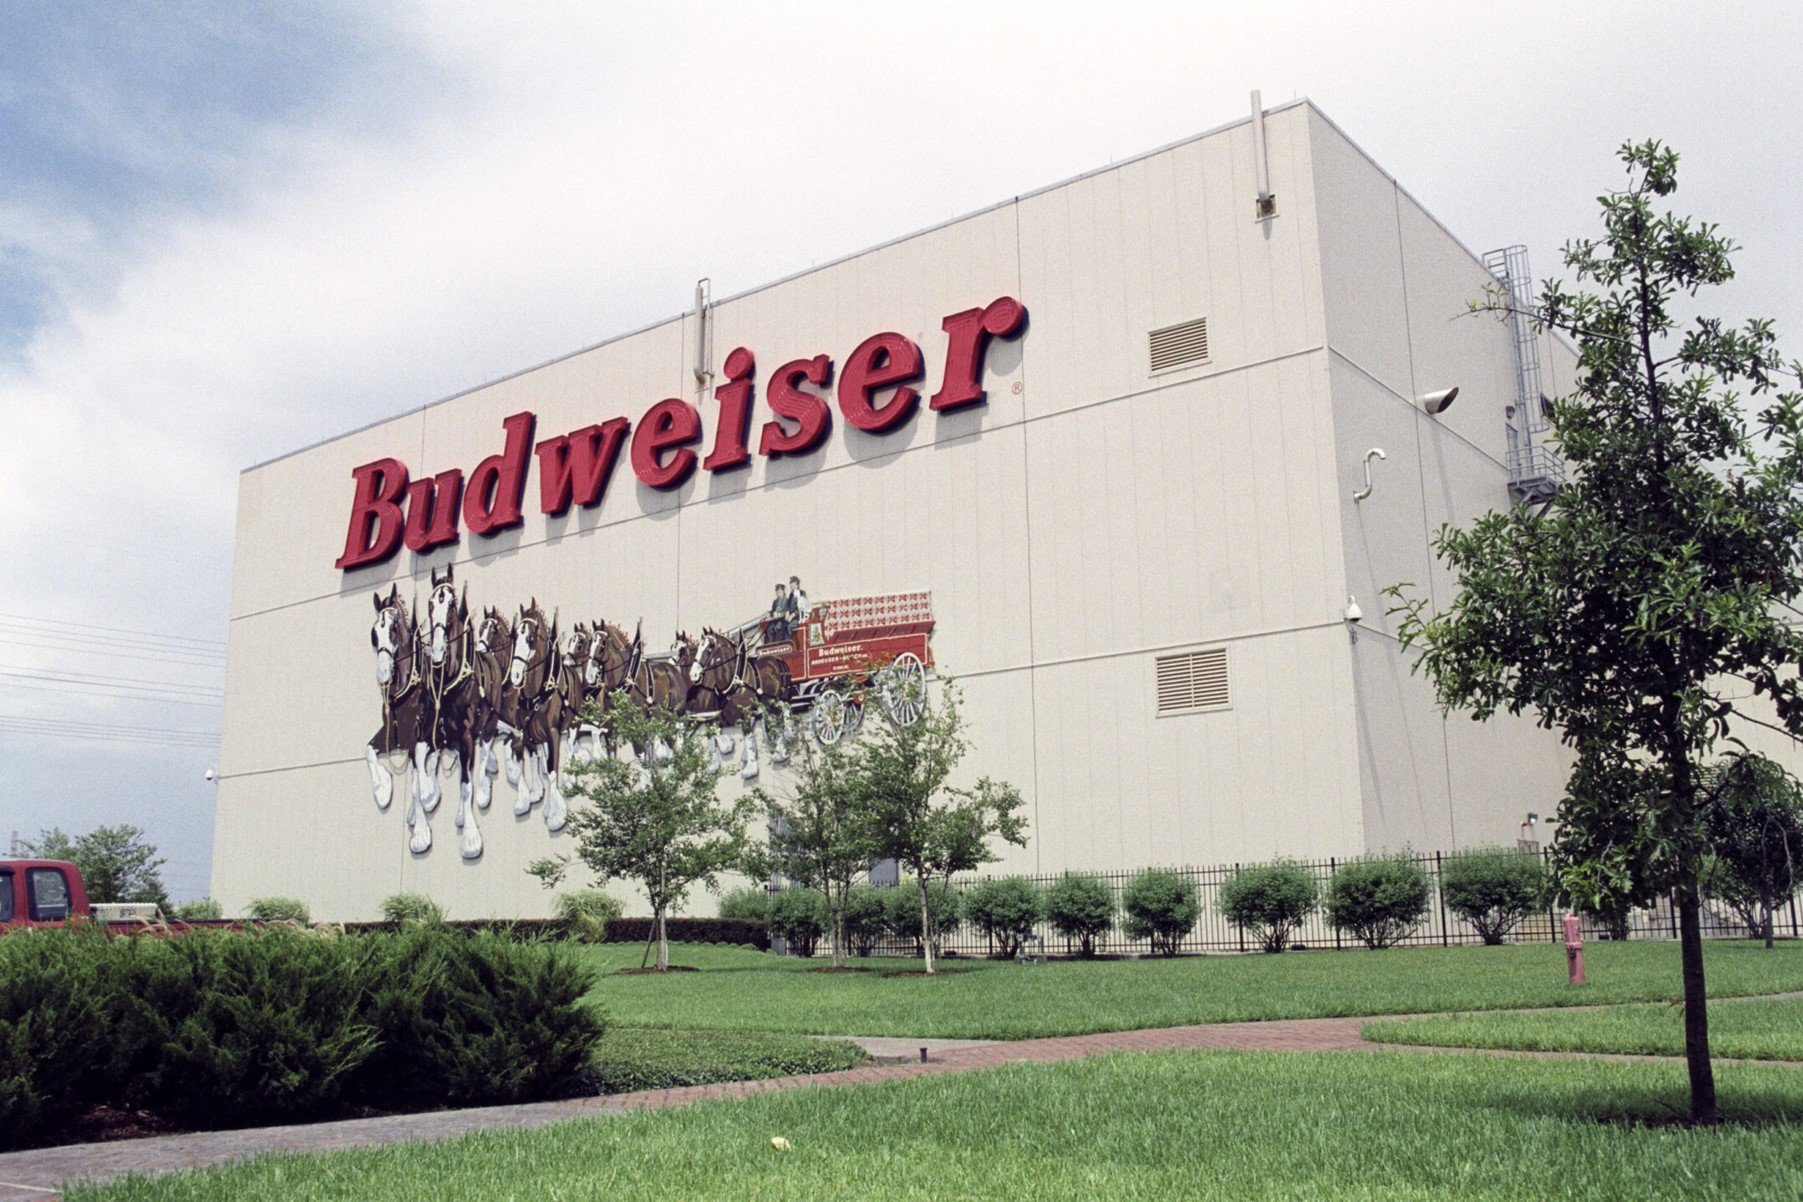 Anheuser-Busch Announces $22.5M Investment in Houston Brewery